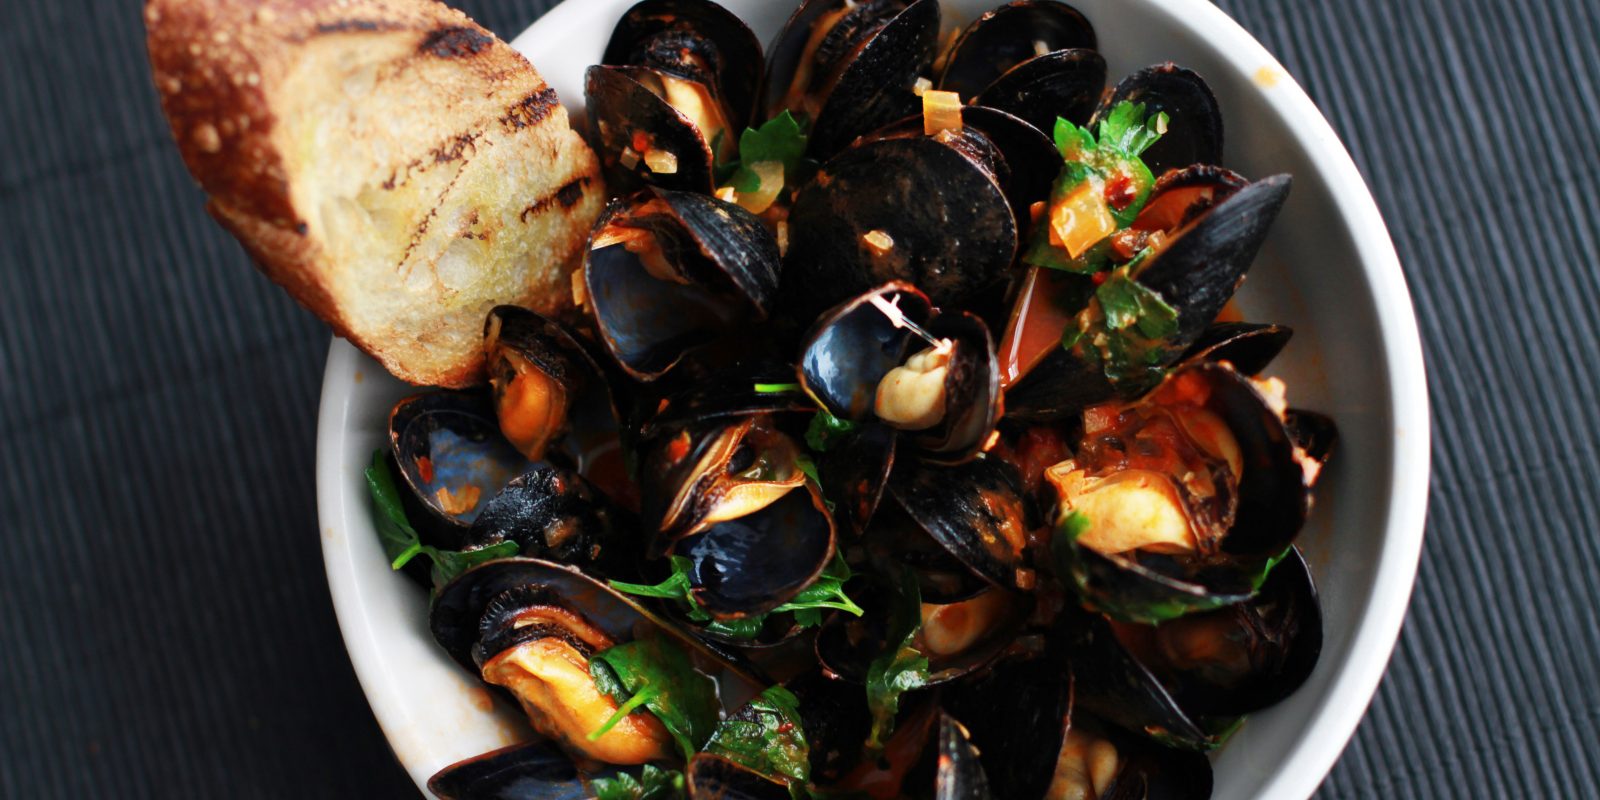 Andrew Zimmern Cooks: Mussels Fra Diavolo - Andrew Zimmern